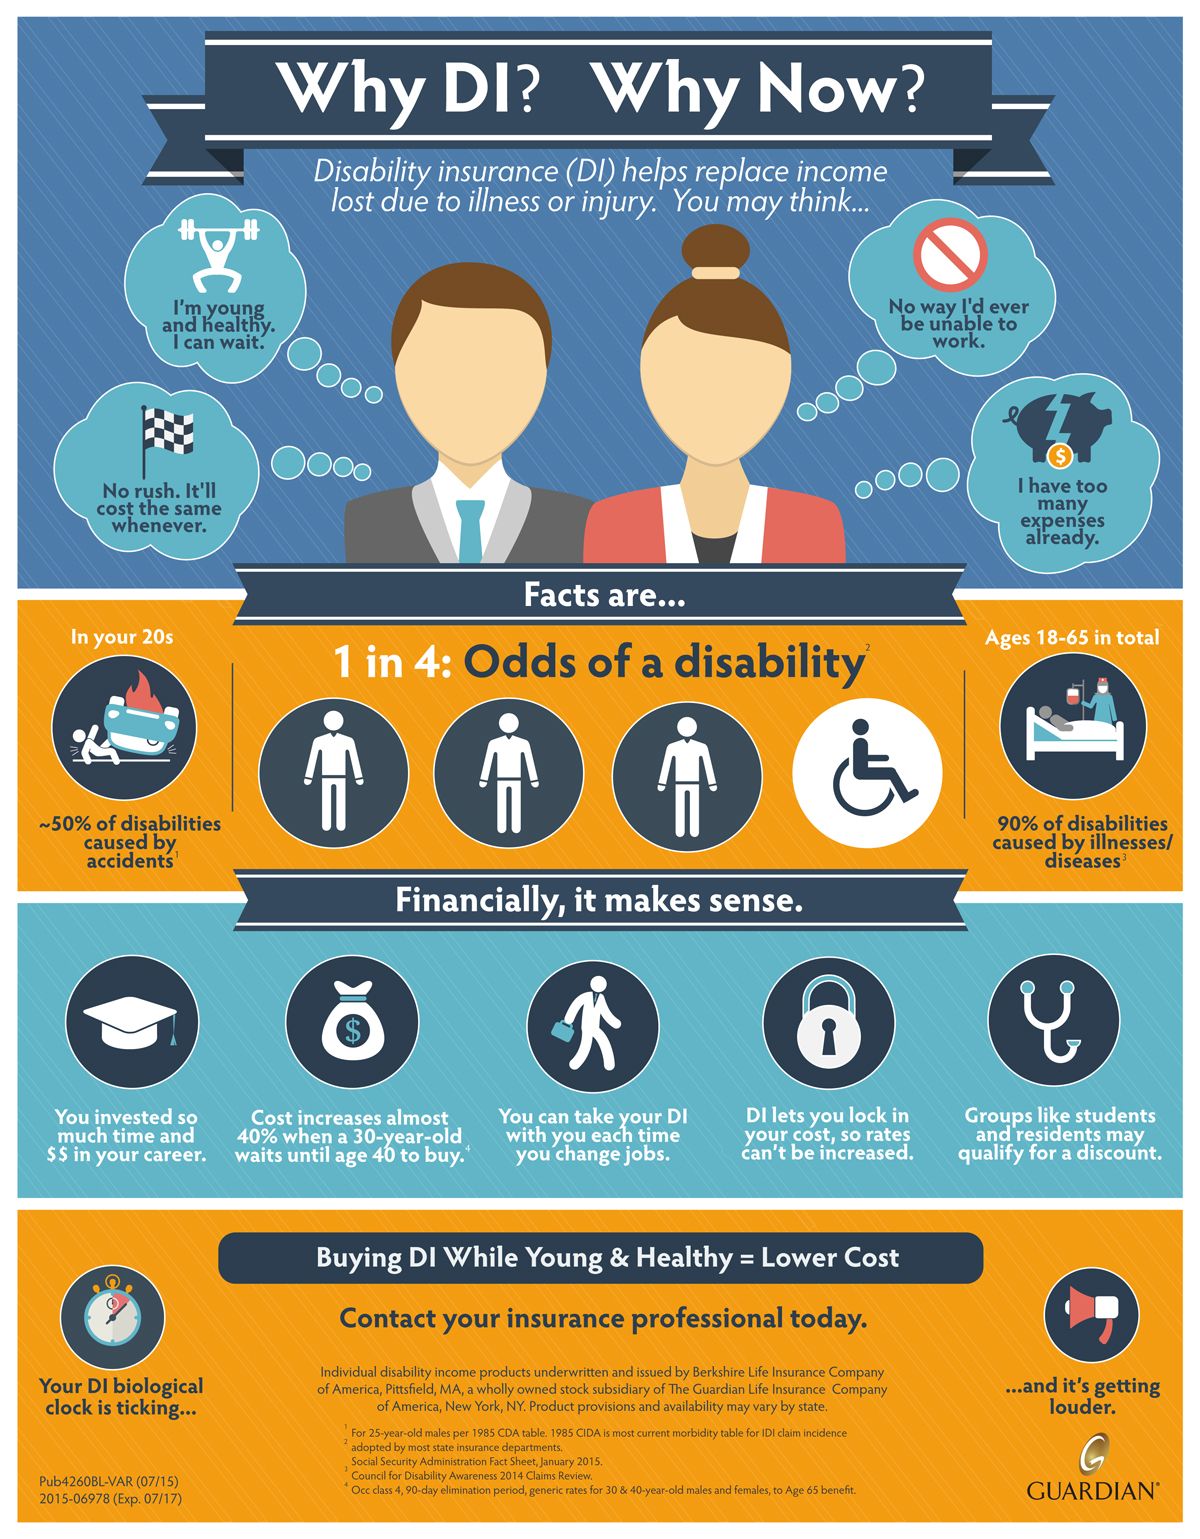 Why Disability Insurance?